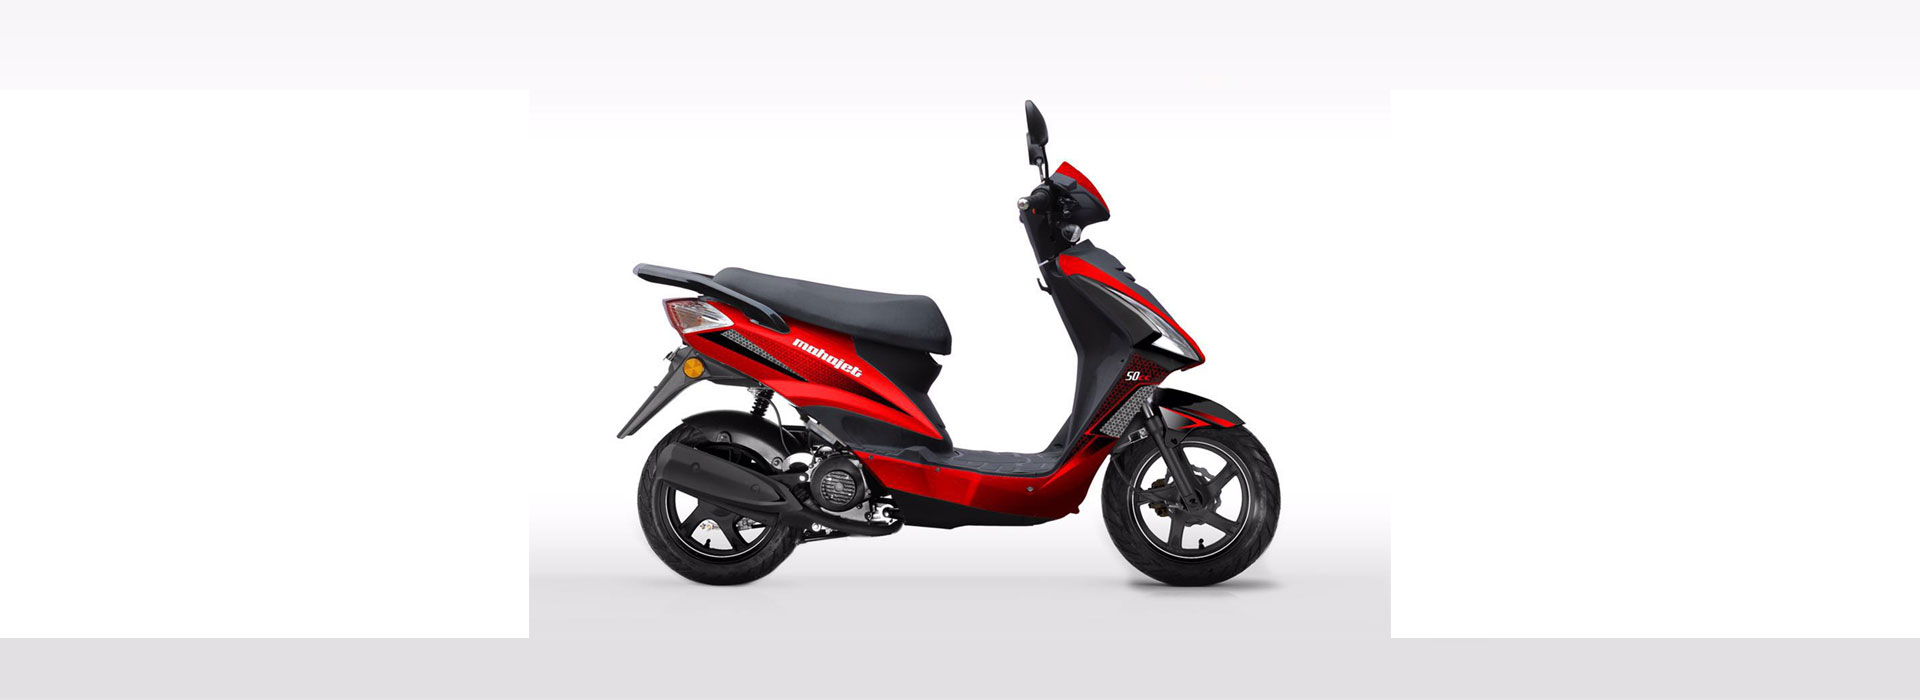 Scooter Hire Gold Queensland Australia – 50cc Petrol Scooter(moped) Hire, Tricycle (Tricicle) Rental, eScooter Hire, eScooter Hire & Electric Bicycles Hiring